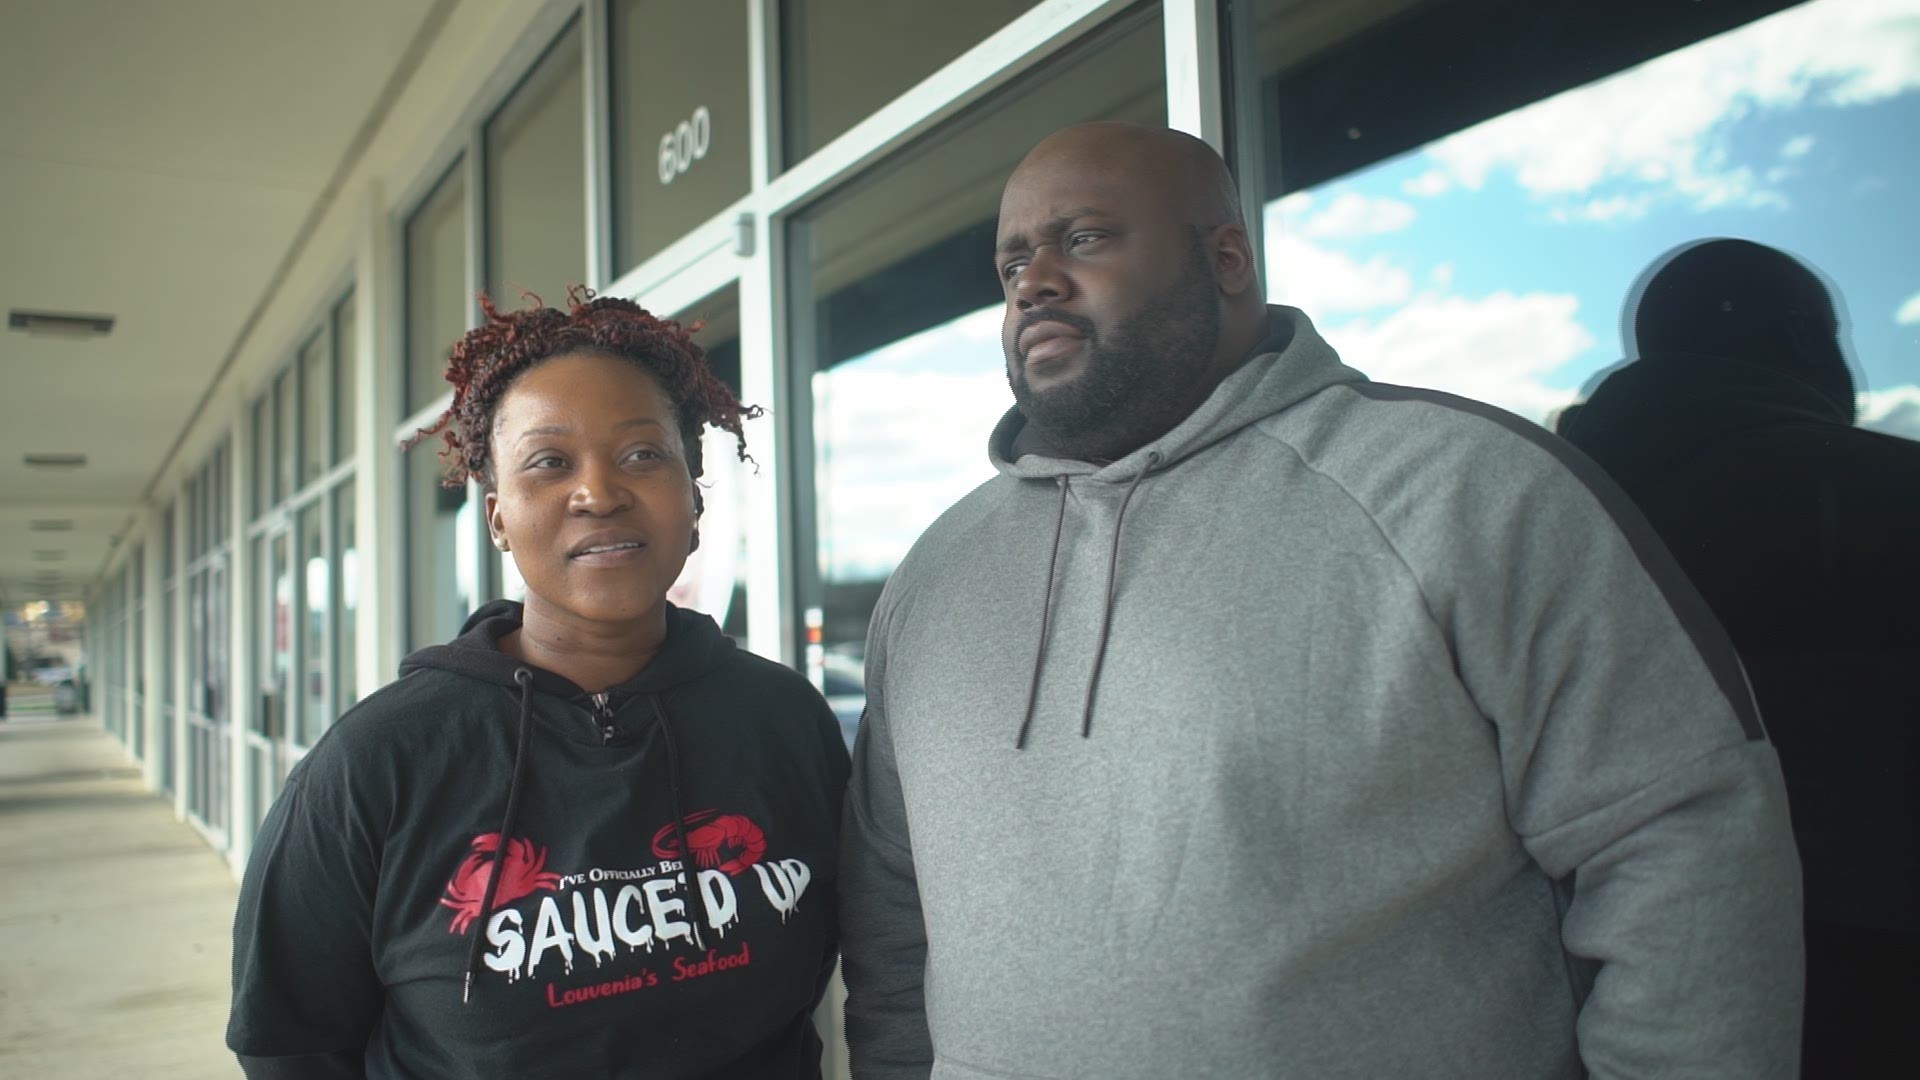 The Michele and Jason Walker say folks can now ‘pull-up and get sauced-up’ at Louvenia's Seafood Market's storefront in Macon.